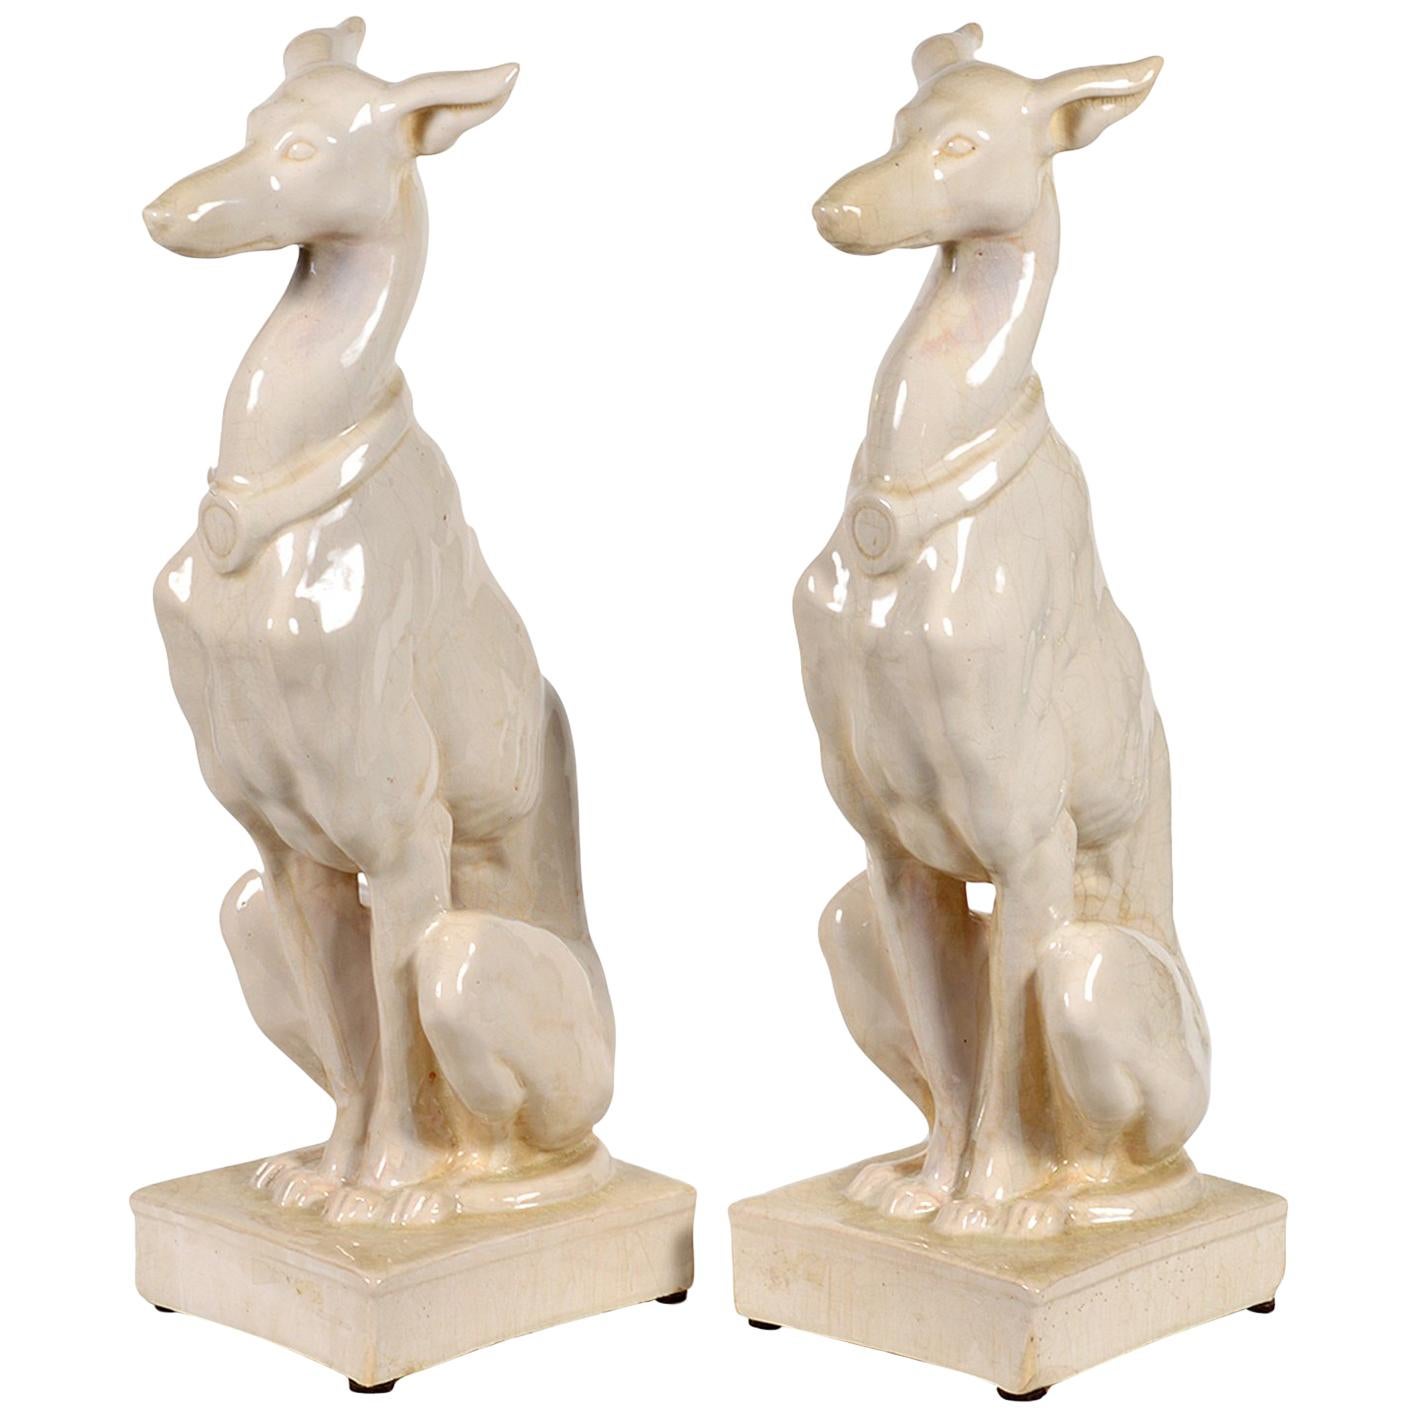 Pair of Vintage Italian Life Size Glazed Terracotta Grayhound Dogs or Whippets